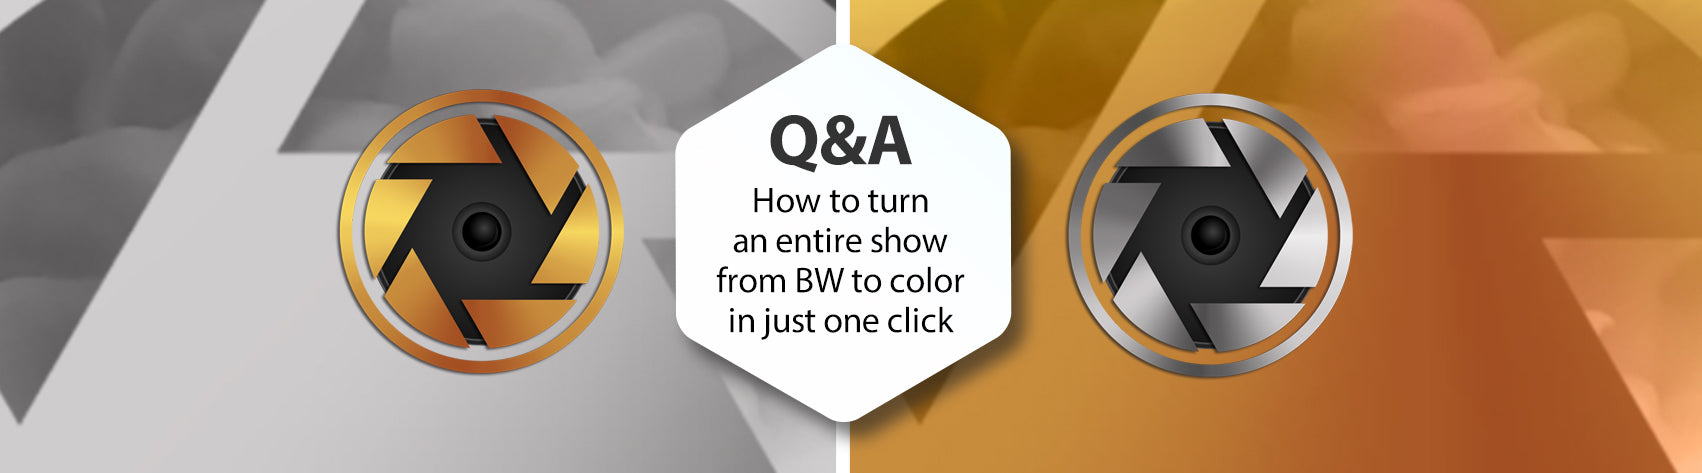 Q&A - How to turn an entire show from BW to color in just one click